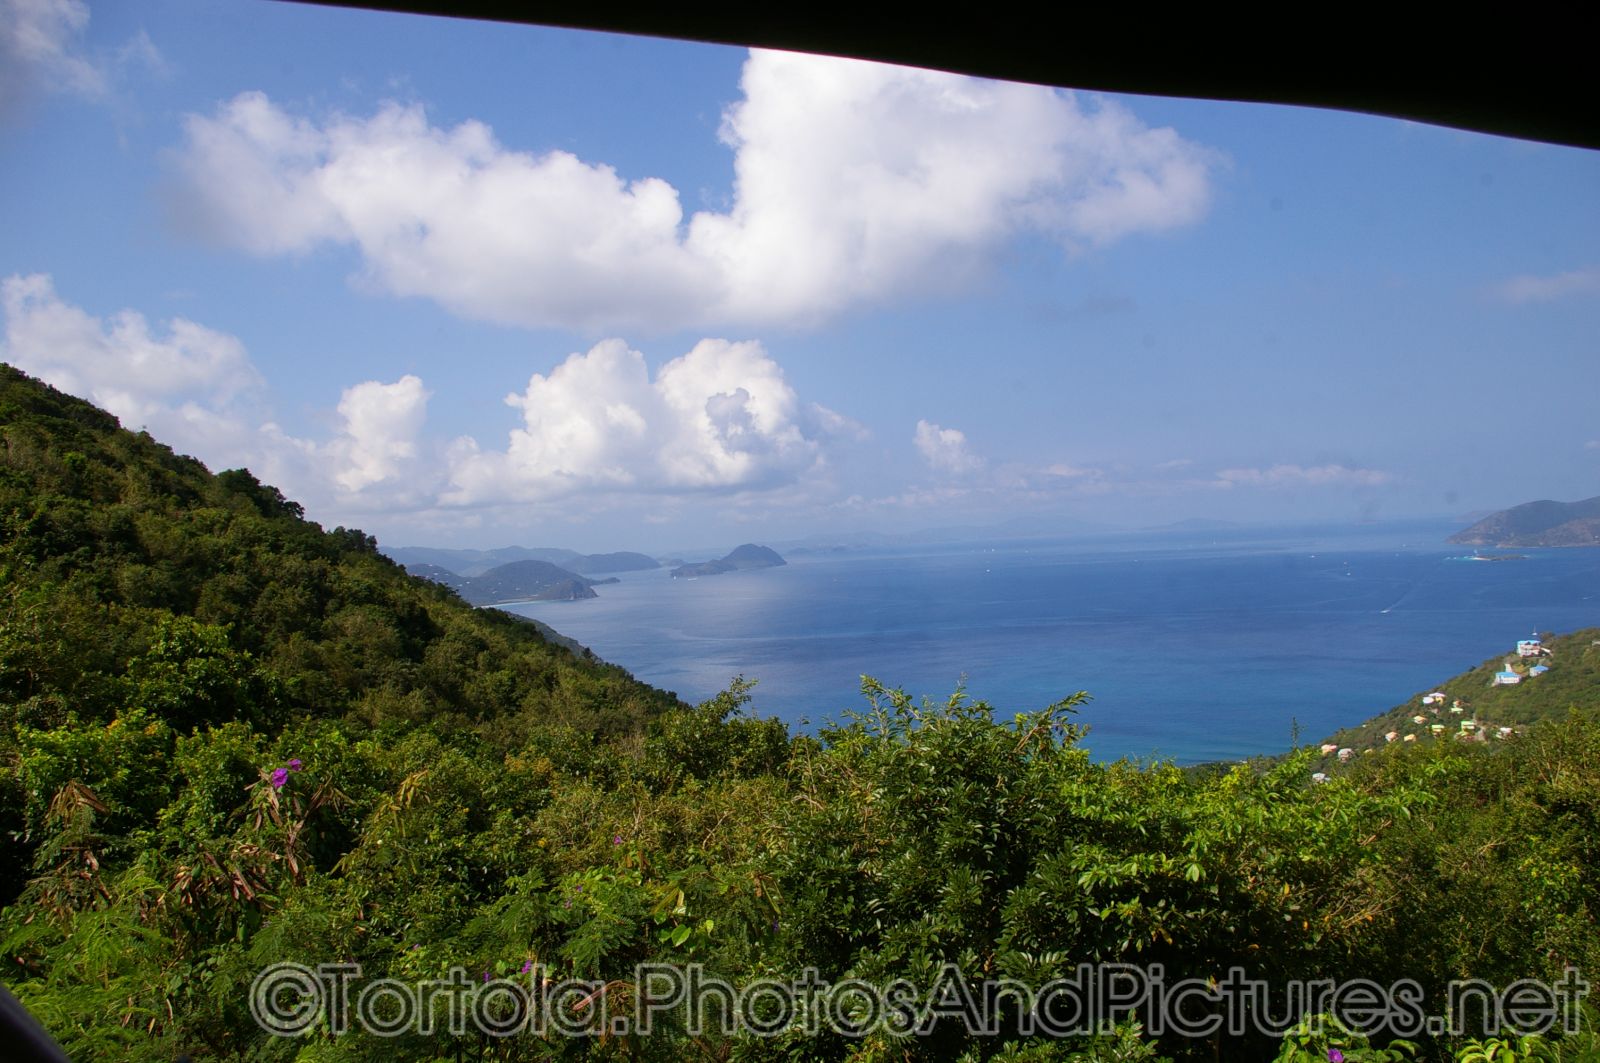 The Caribbean Sea as viewed from a hill in Tortola.jpg
